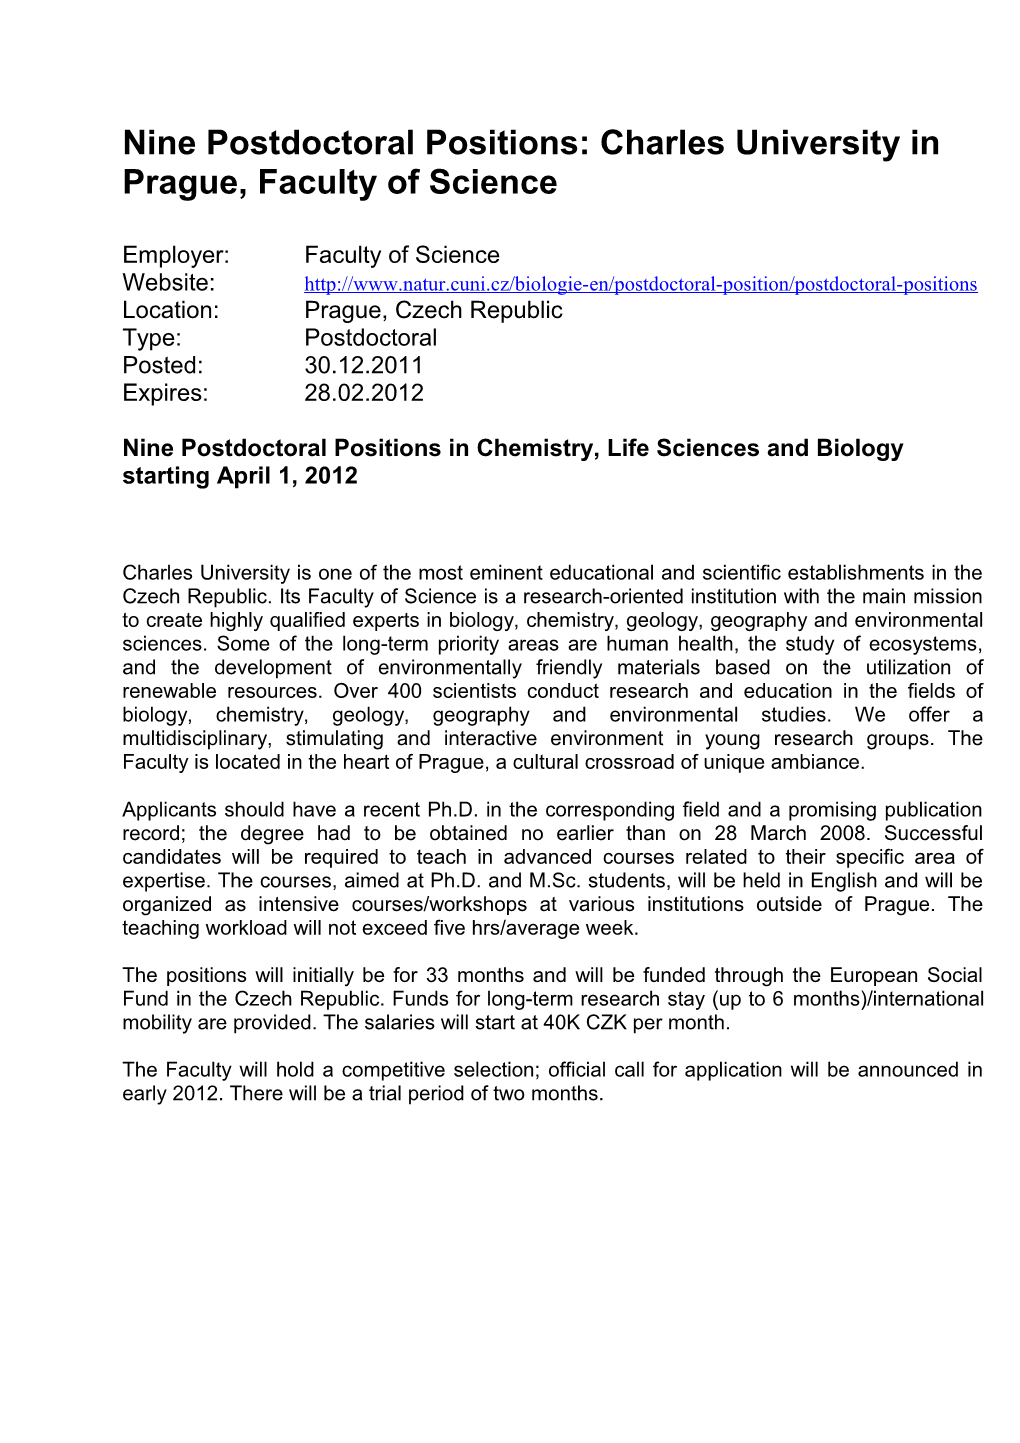 Nine Postdoctoral Positions: Charles University in Prague, Faculty of Science